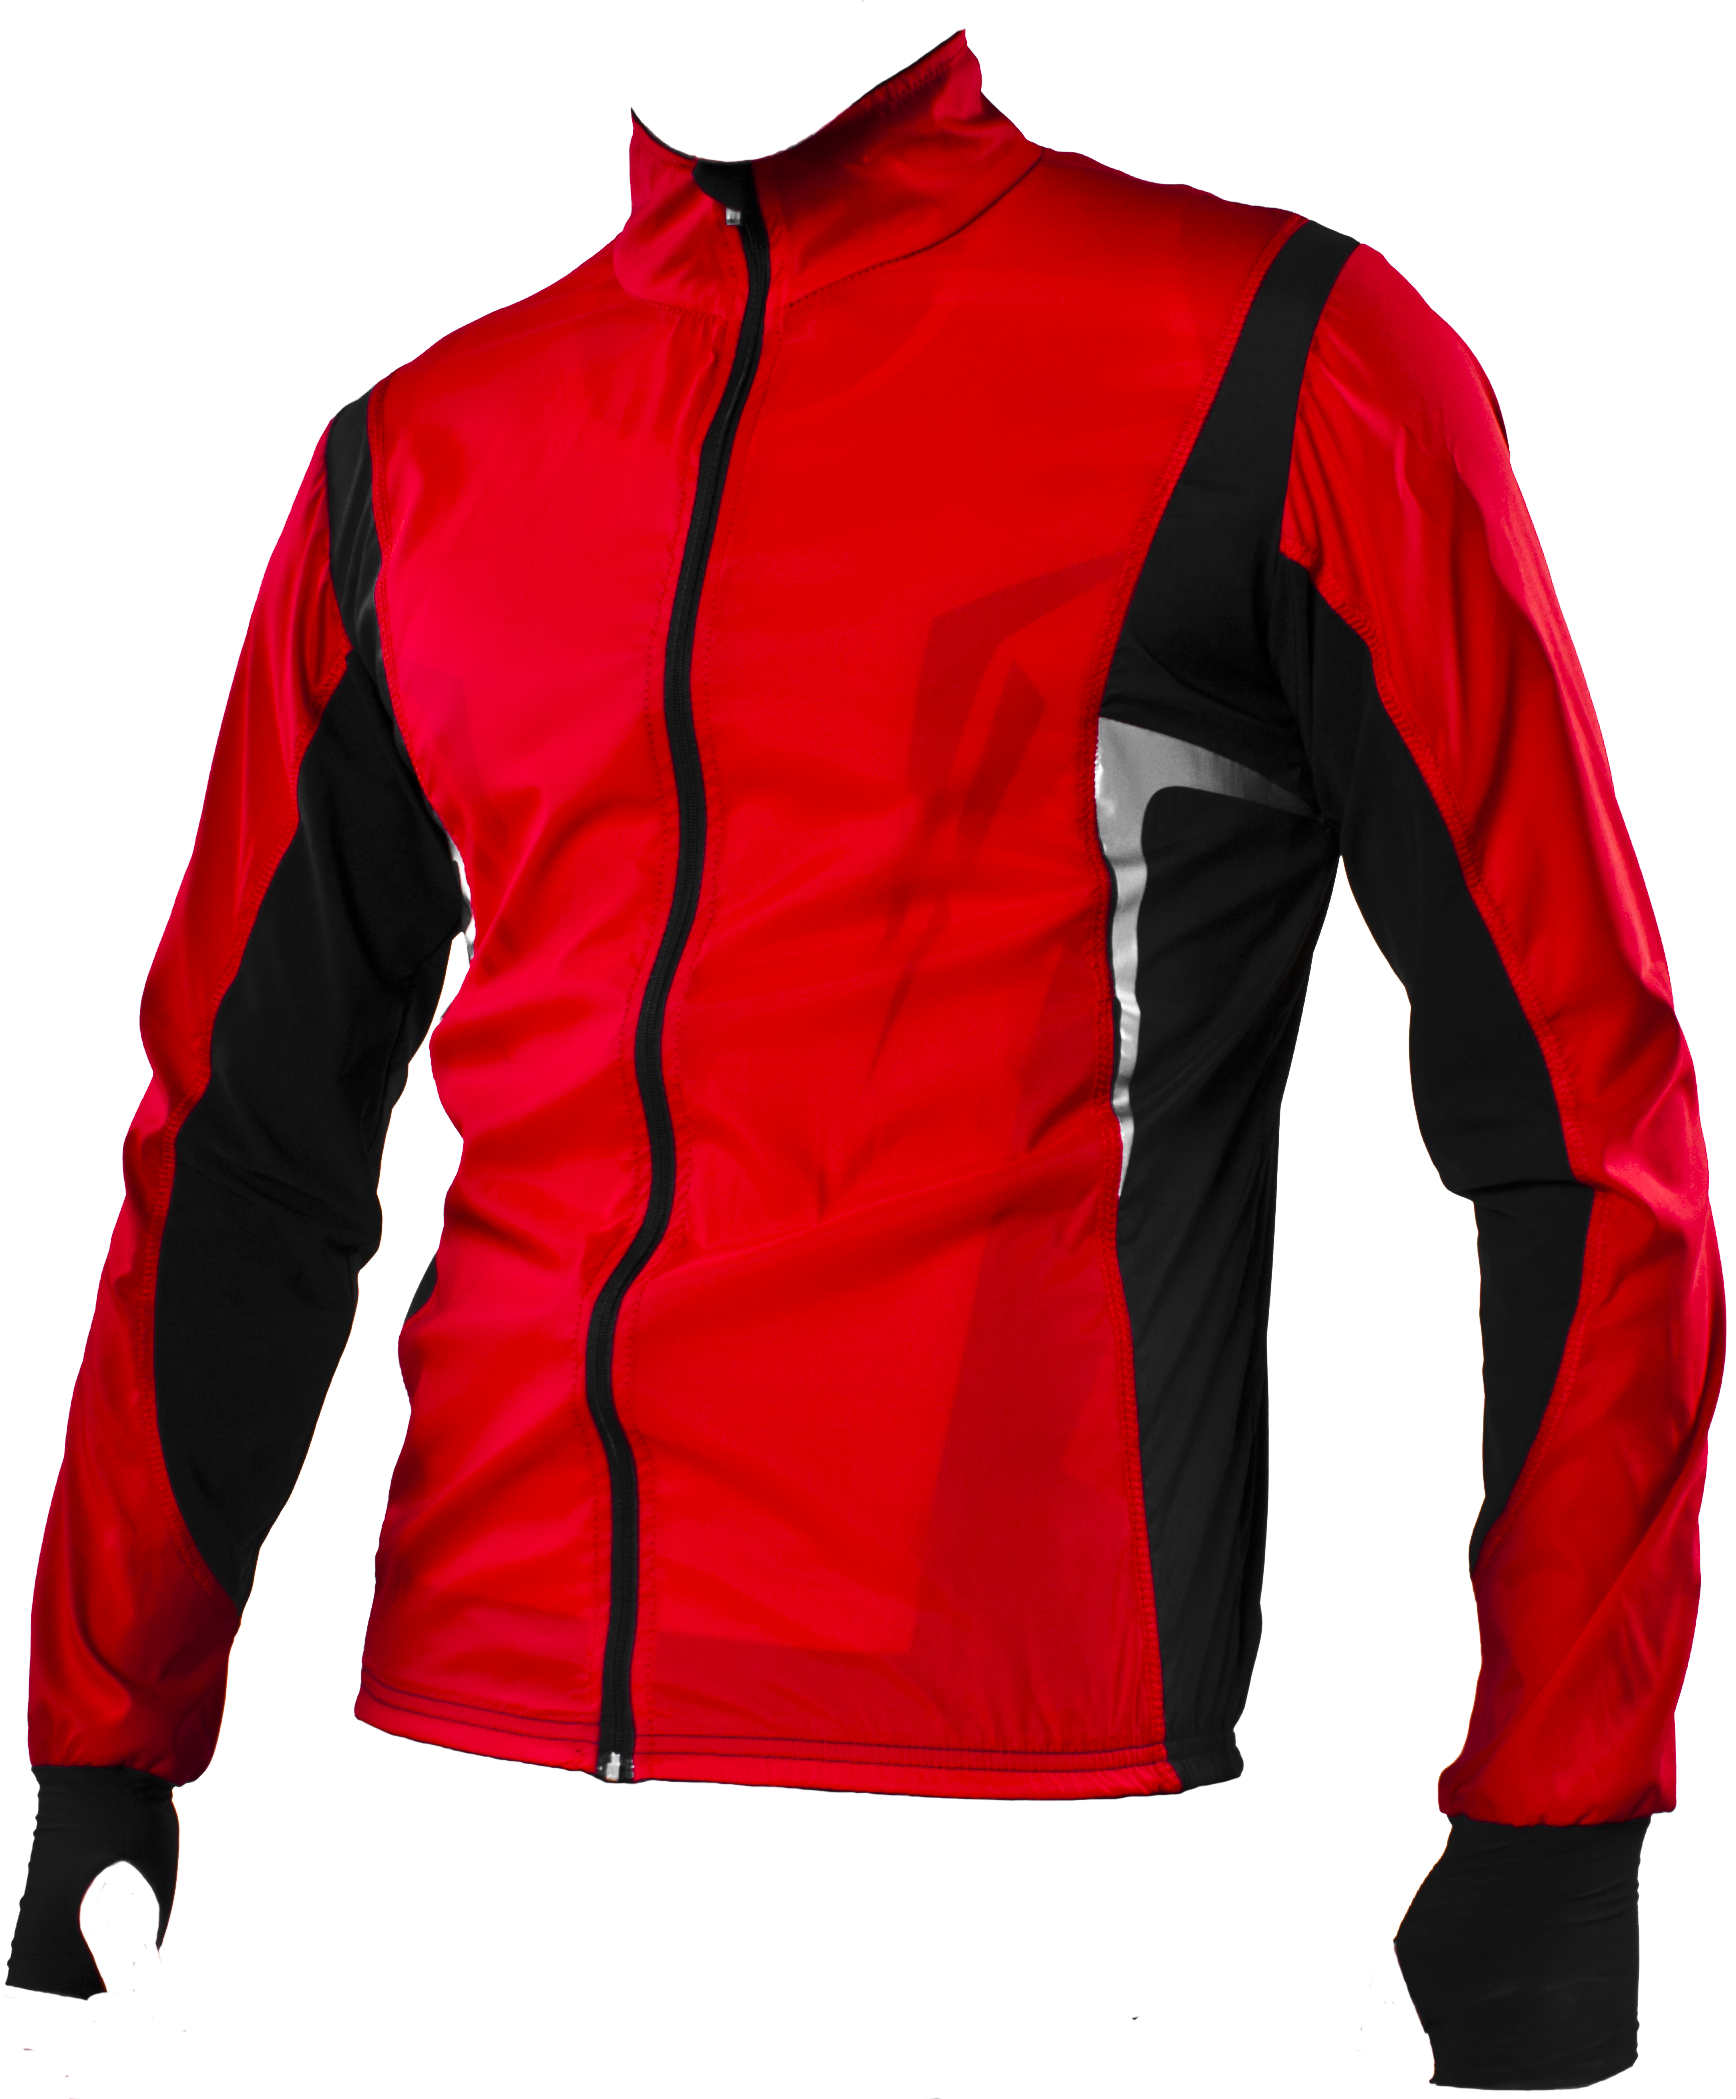 jacket png images are downloaded charge crazypngm crazy png images download #30522